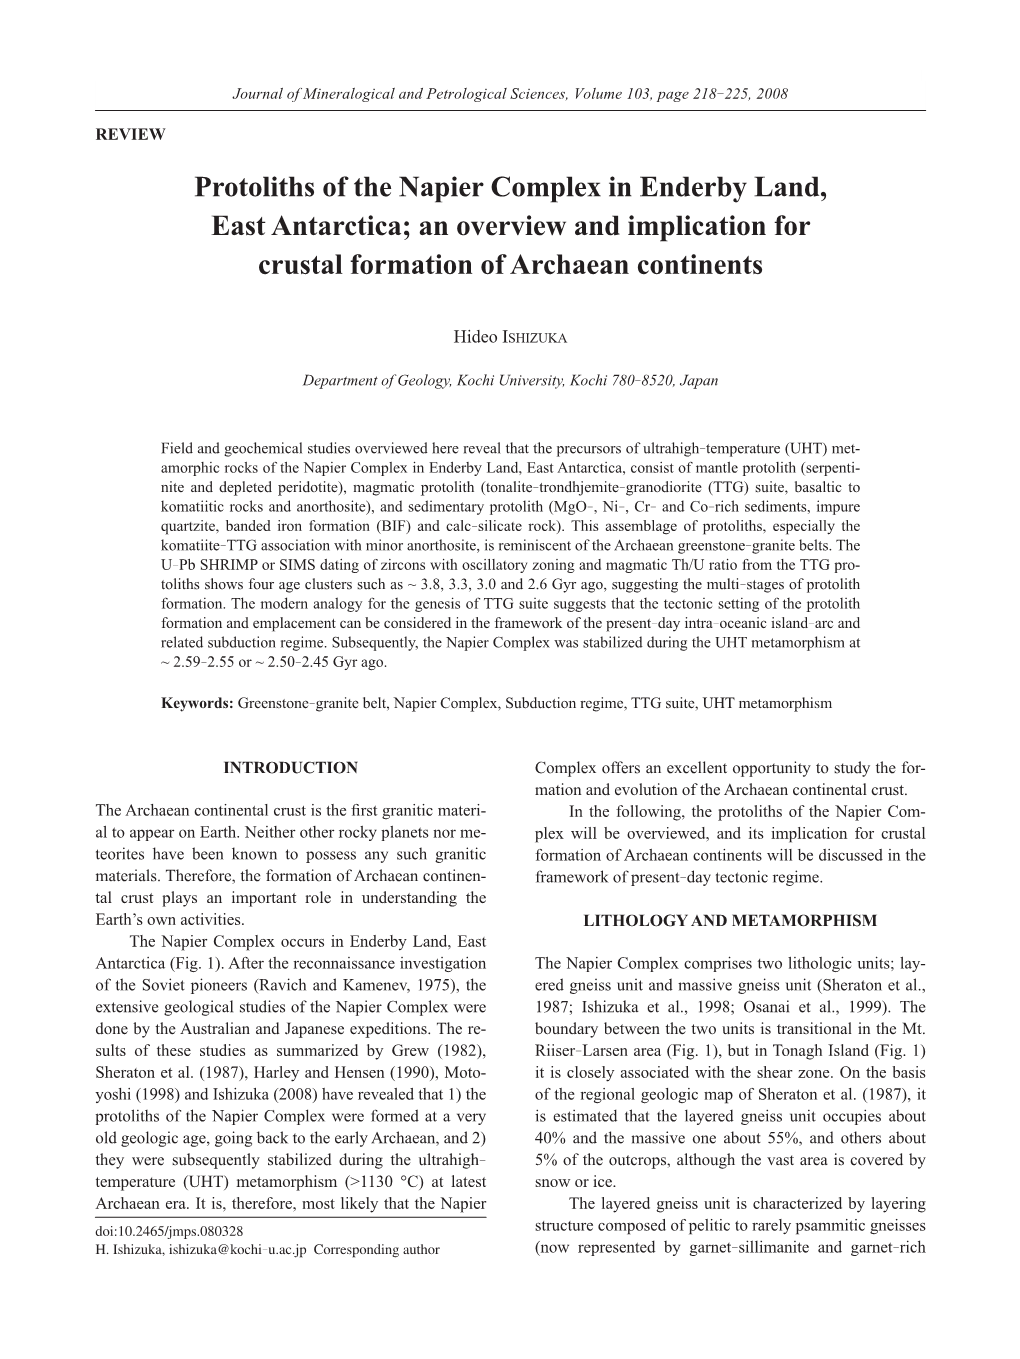 Protoliths of the Napier Complex in Enderby Land, East Antarctica; an Overview and Implication for Crustal Formation of Archaean Continents